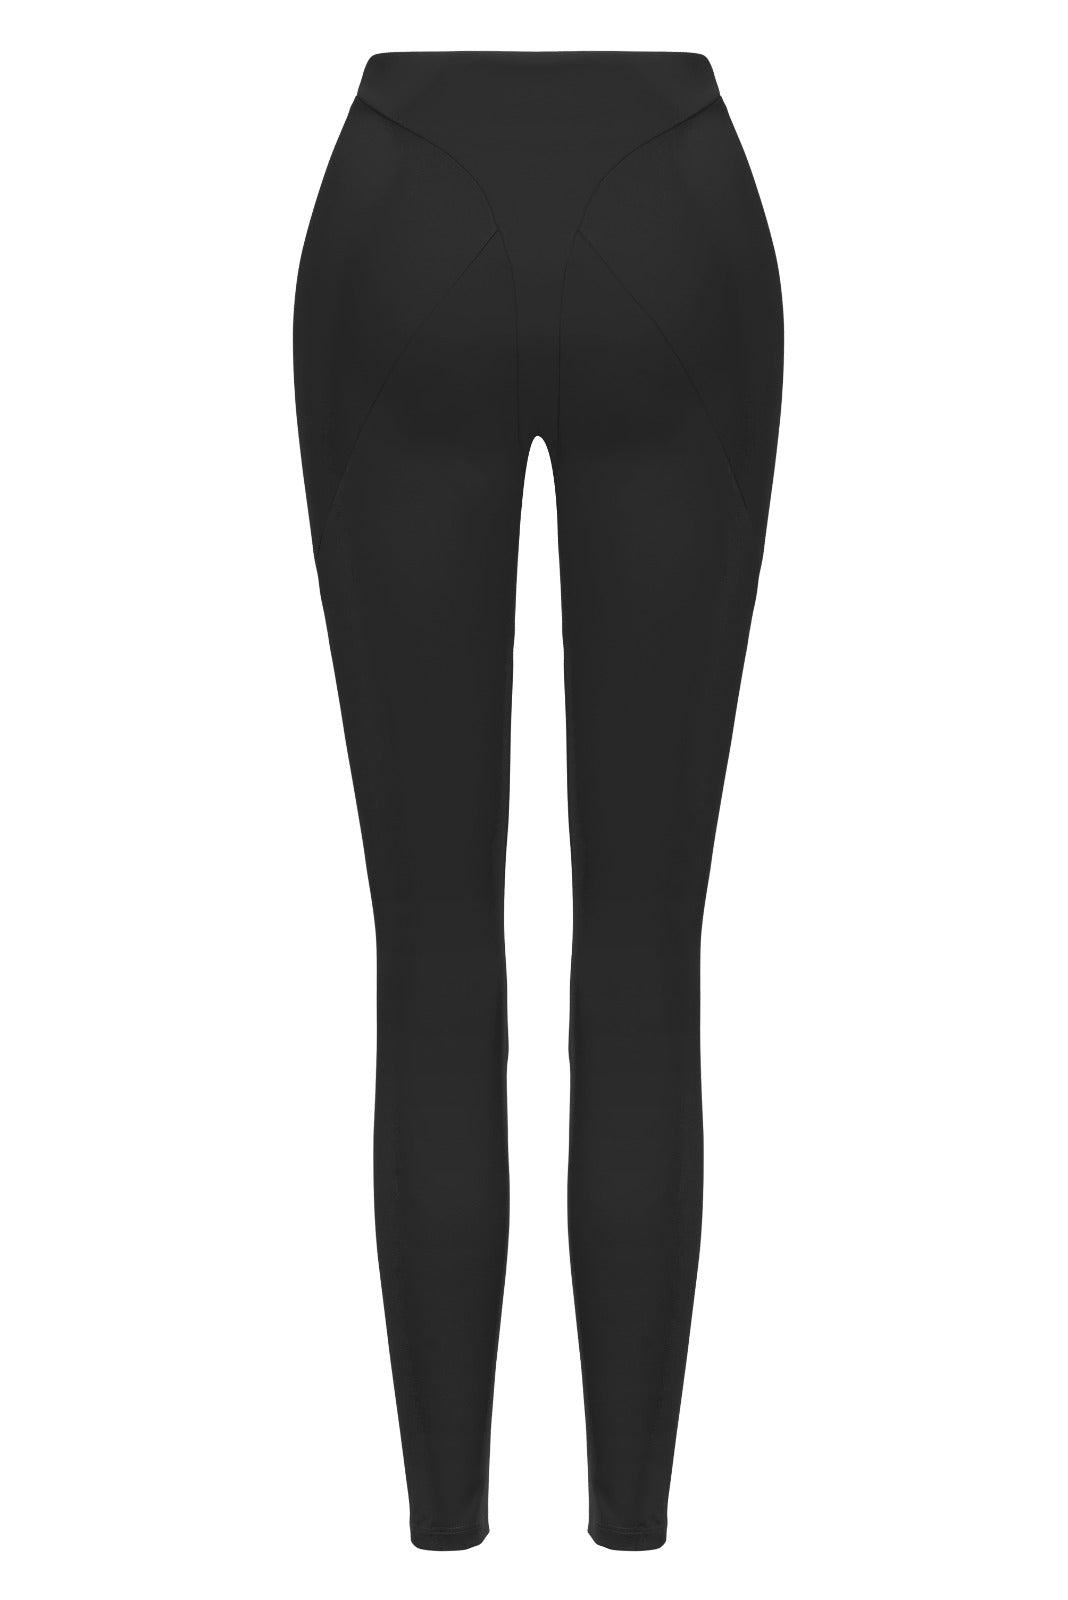 Ladies Gym Tights Price in Pakistan - View Latest Collection of